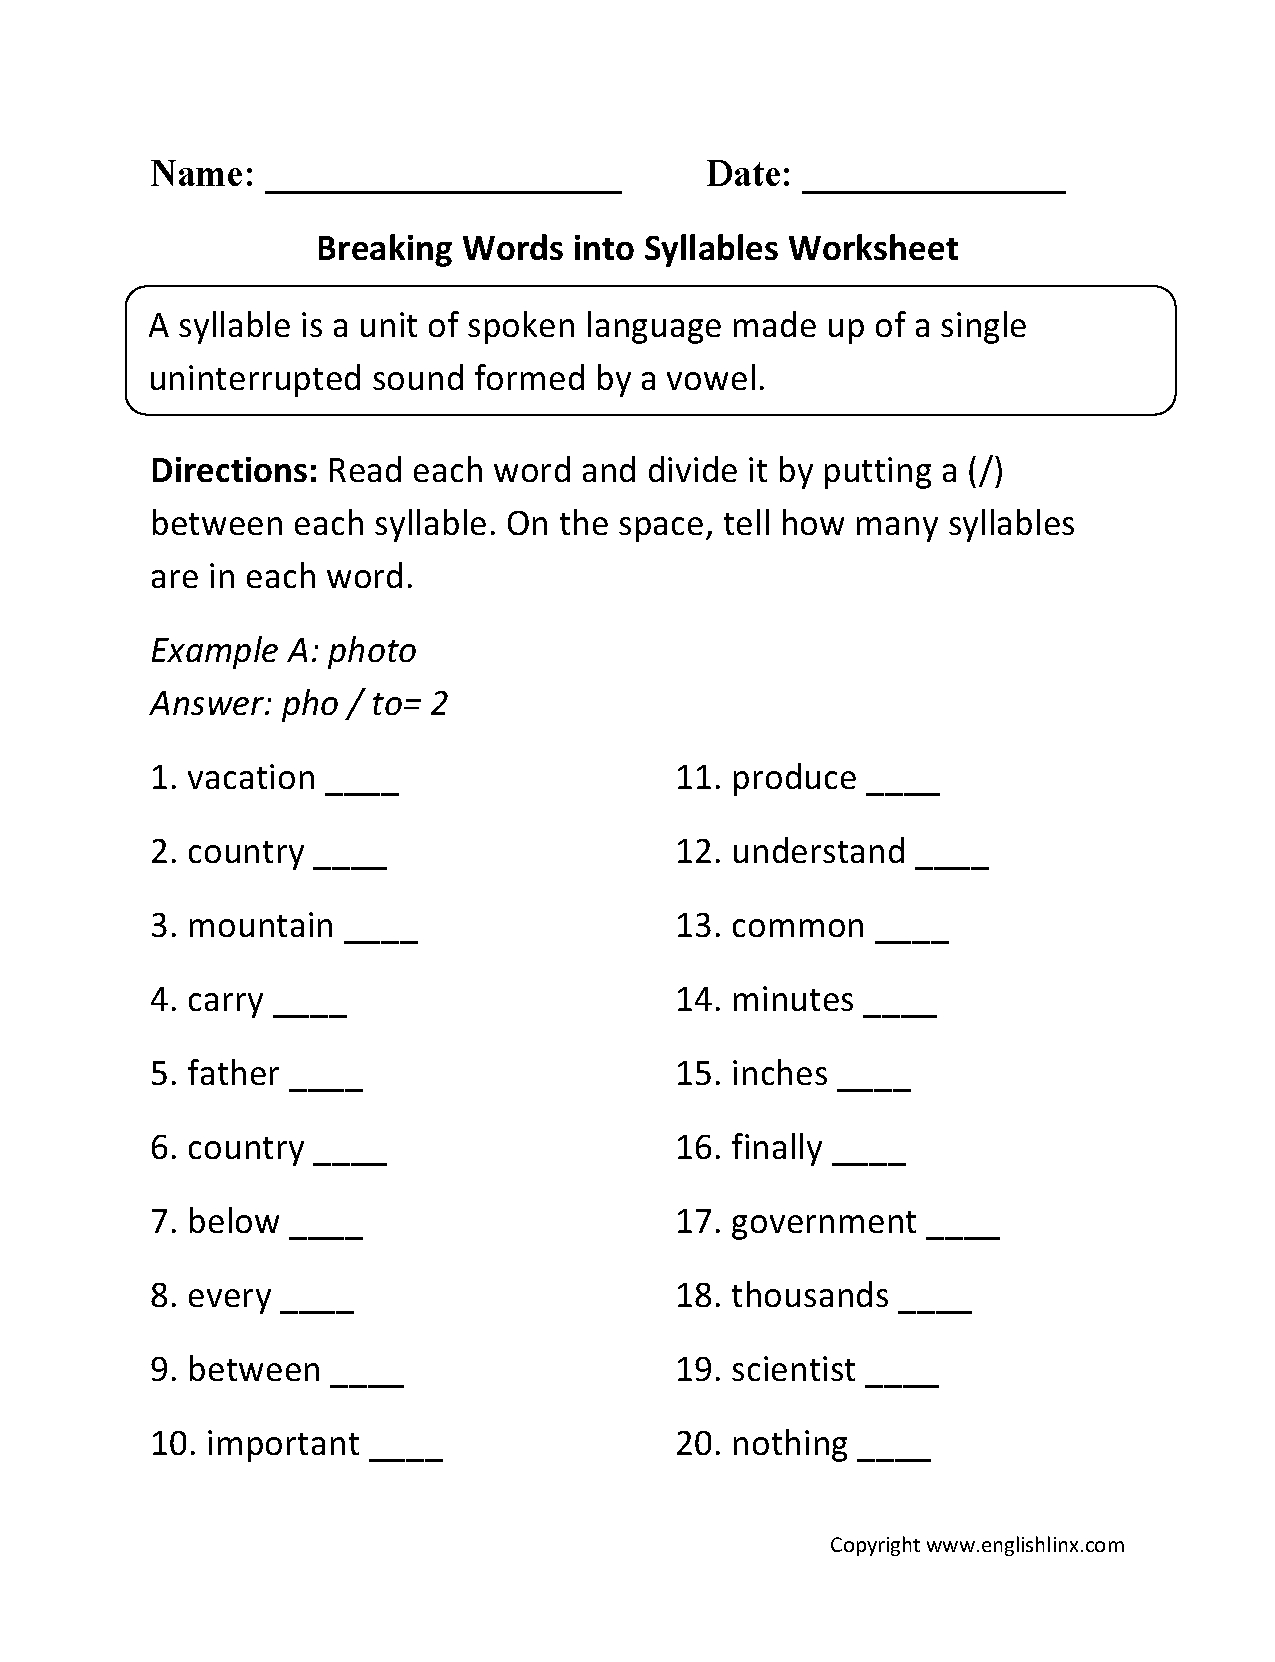 Breaking Words Into Syllables Worksheets | Worksheets | Syllable - Free Printable Open And Closed Syllable Worksheets